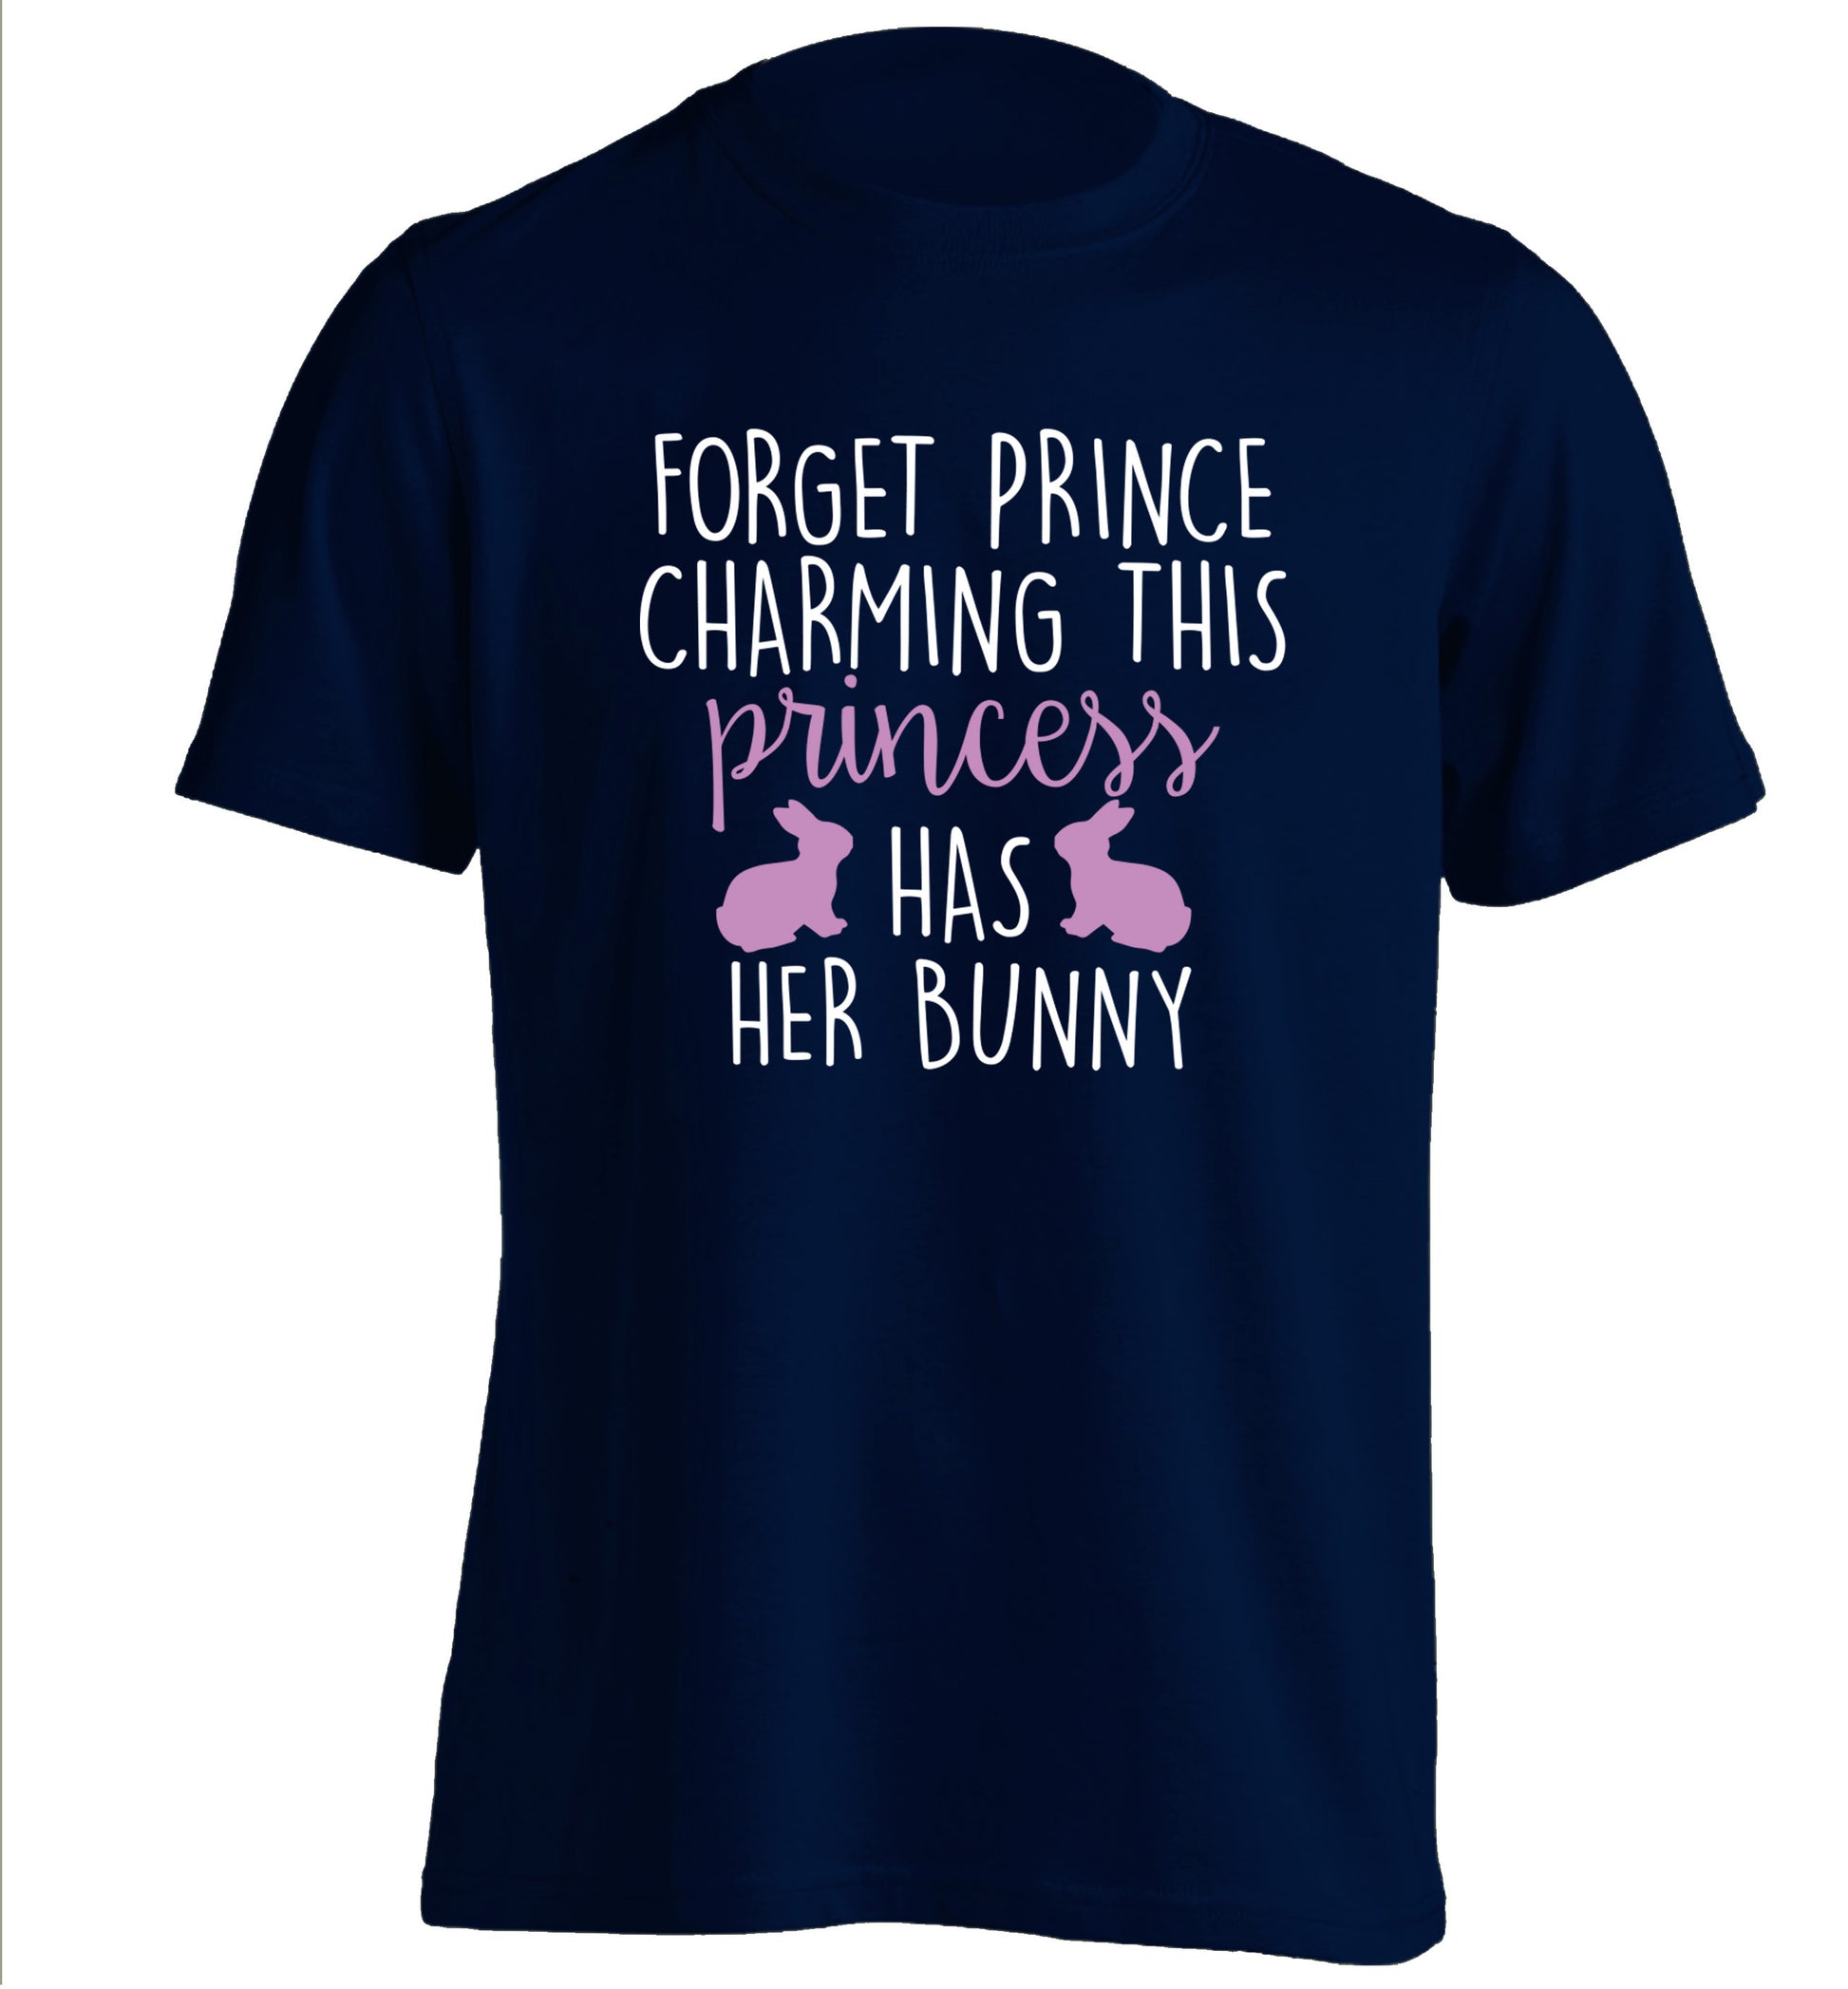 Forget prince charming this princess has her bunny adults unisex navy Tshirt 2XL